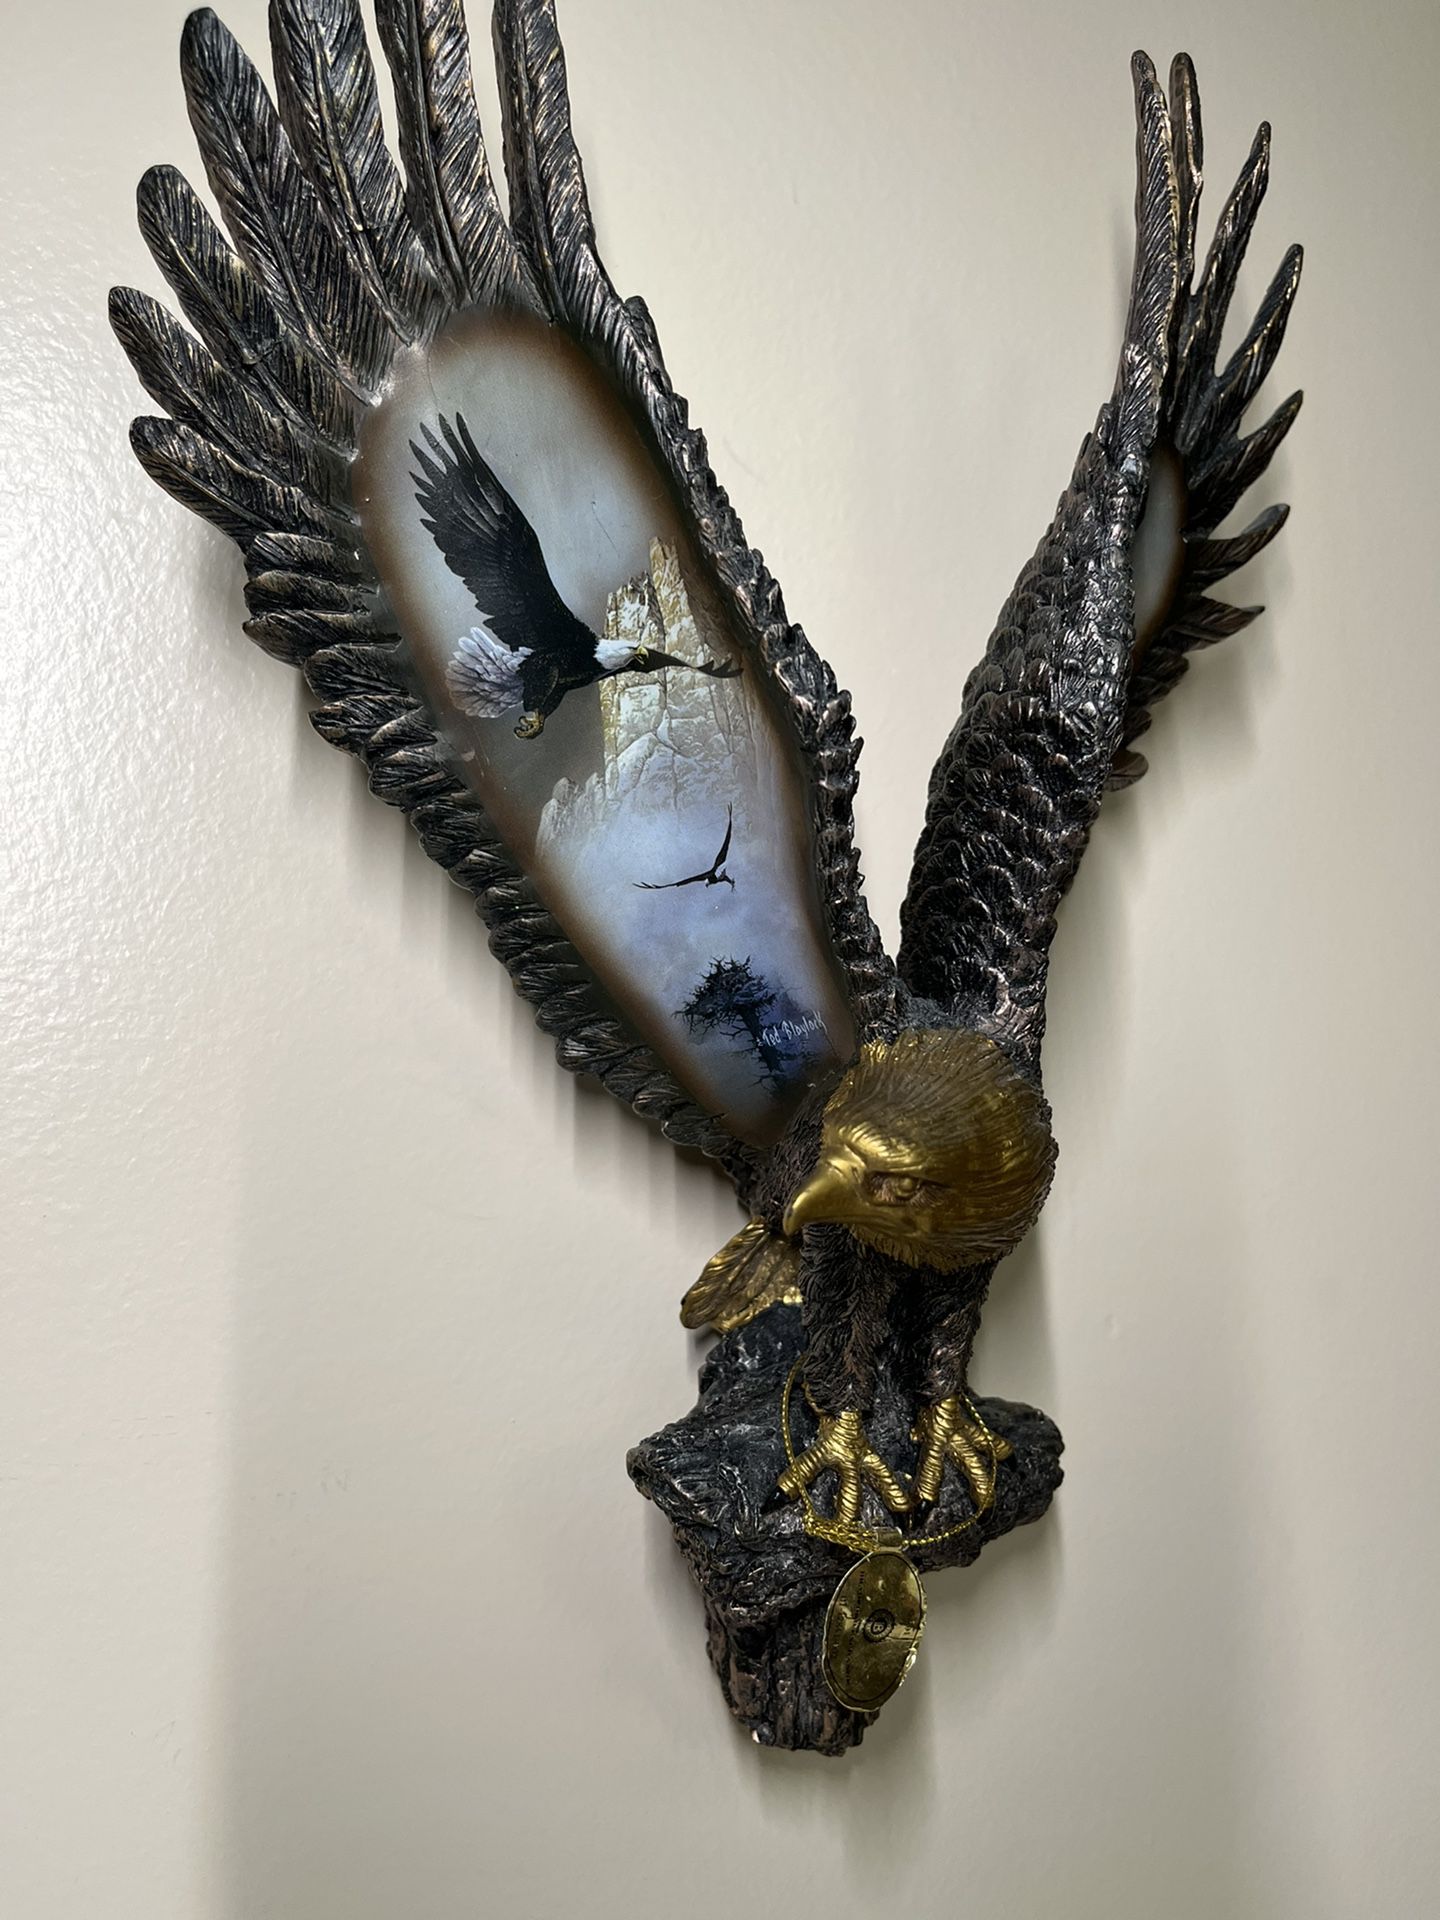 4 TED BLAYLOCK EAGLE SCULPTURES COLLECTION